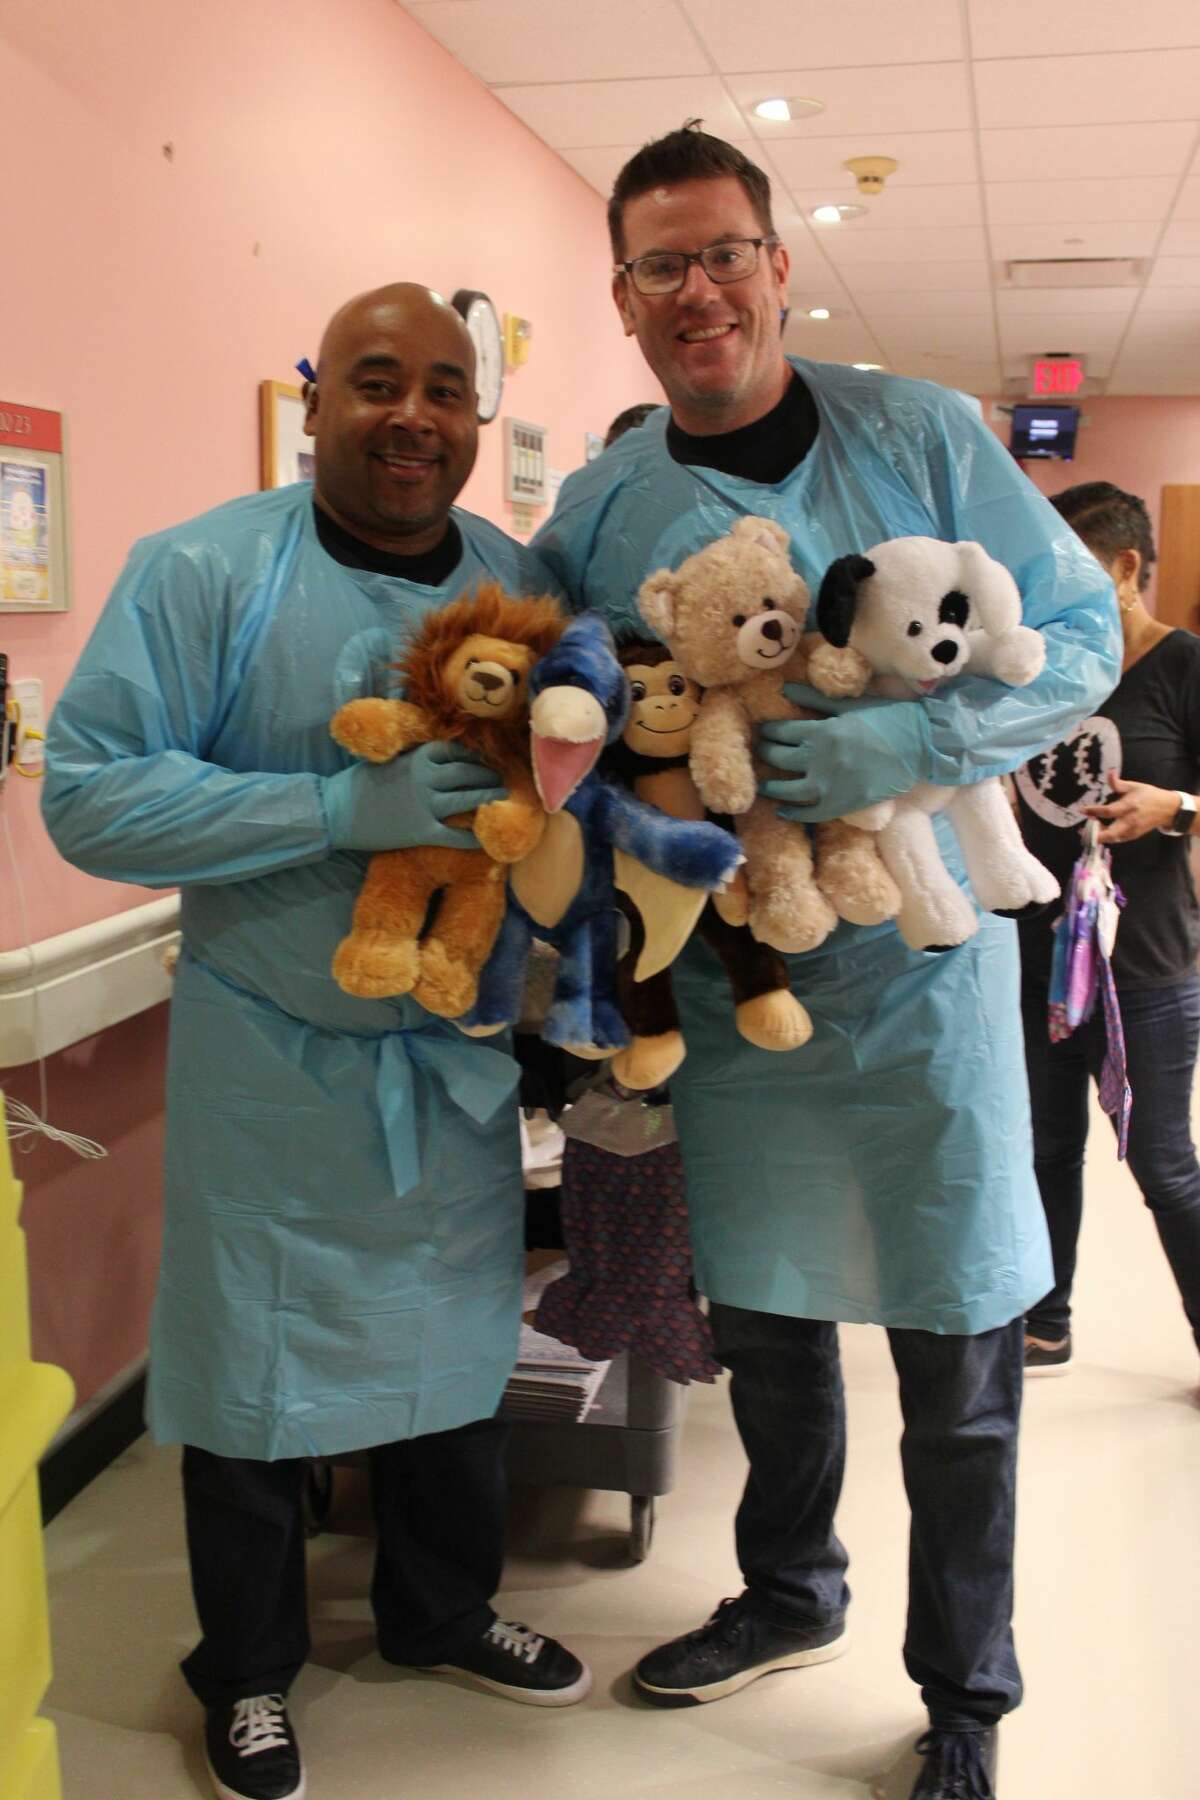 Houston native and MLB umpires Adrian Johnson and Chris Conroy are part of a group of umpires involved in UMPS CARE charities. Johnson, Conroy and their crew visit children’s hospitals in all 30 MLB cities to put on Build-a-Bear workshops for the kids.